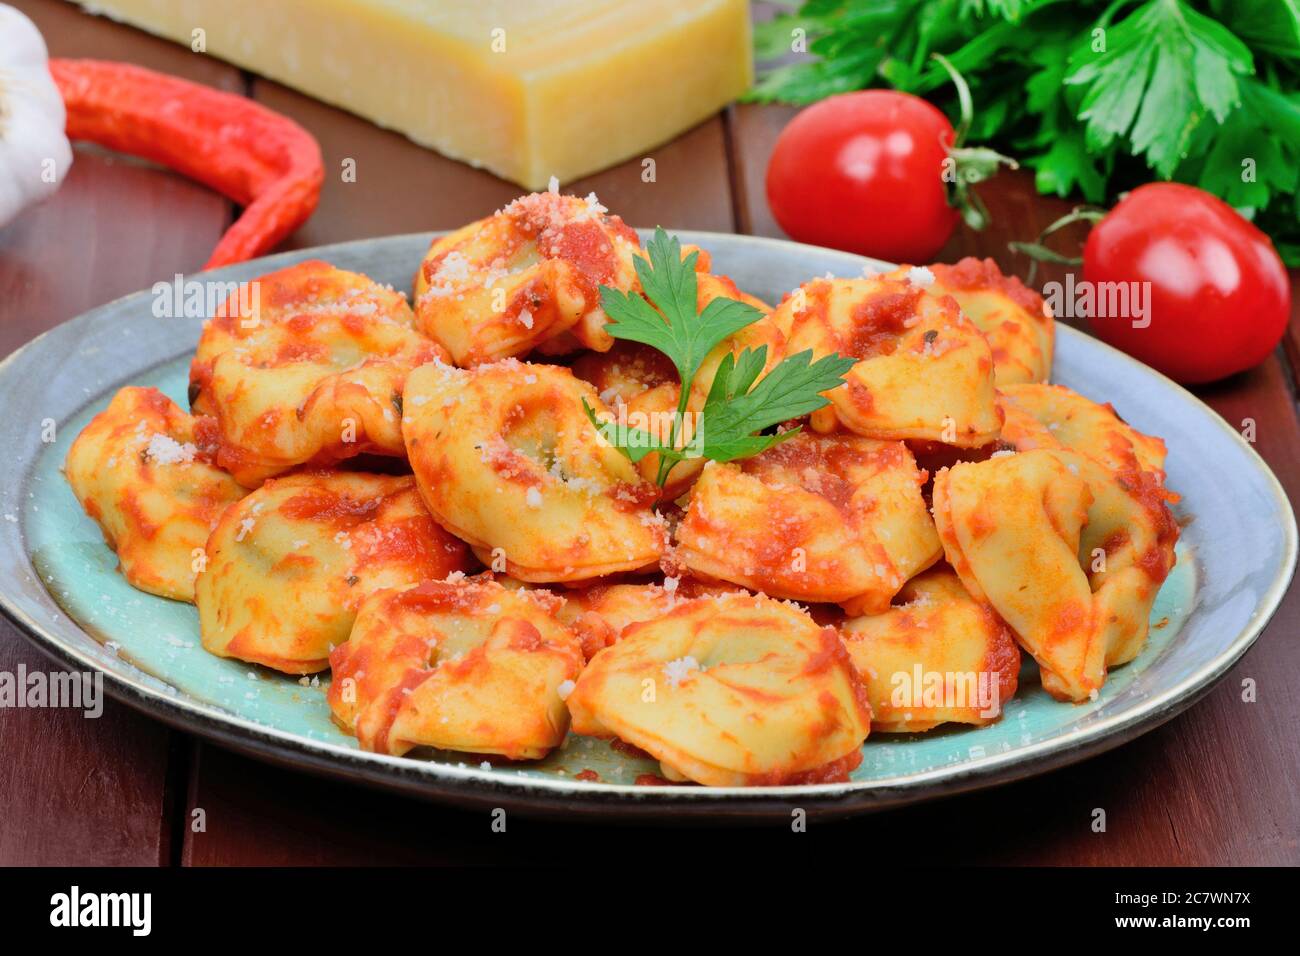 Tortellini with tomatoes sauce in a plate on a wood table Stock Photo